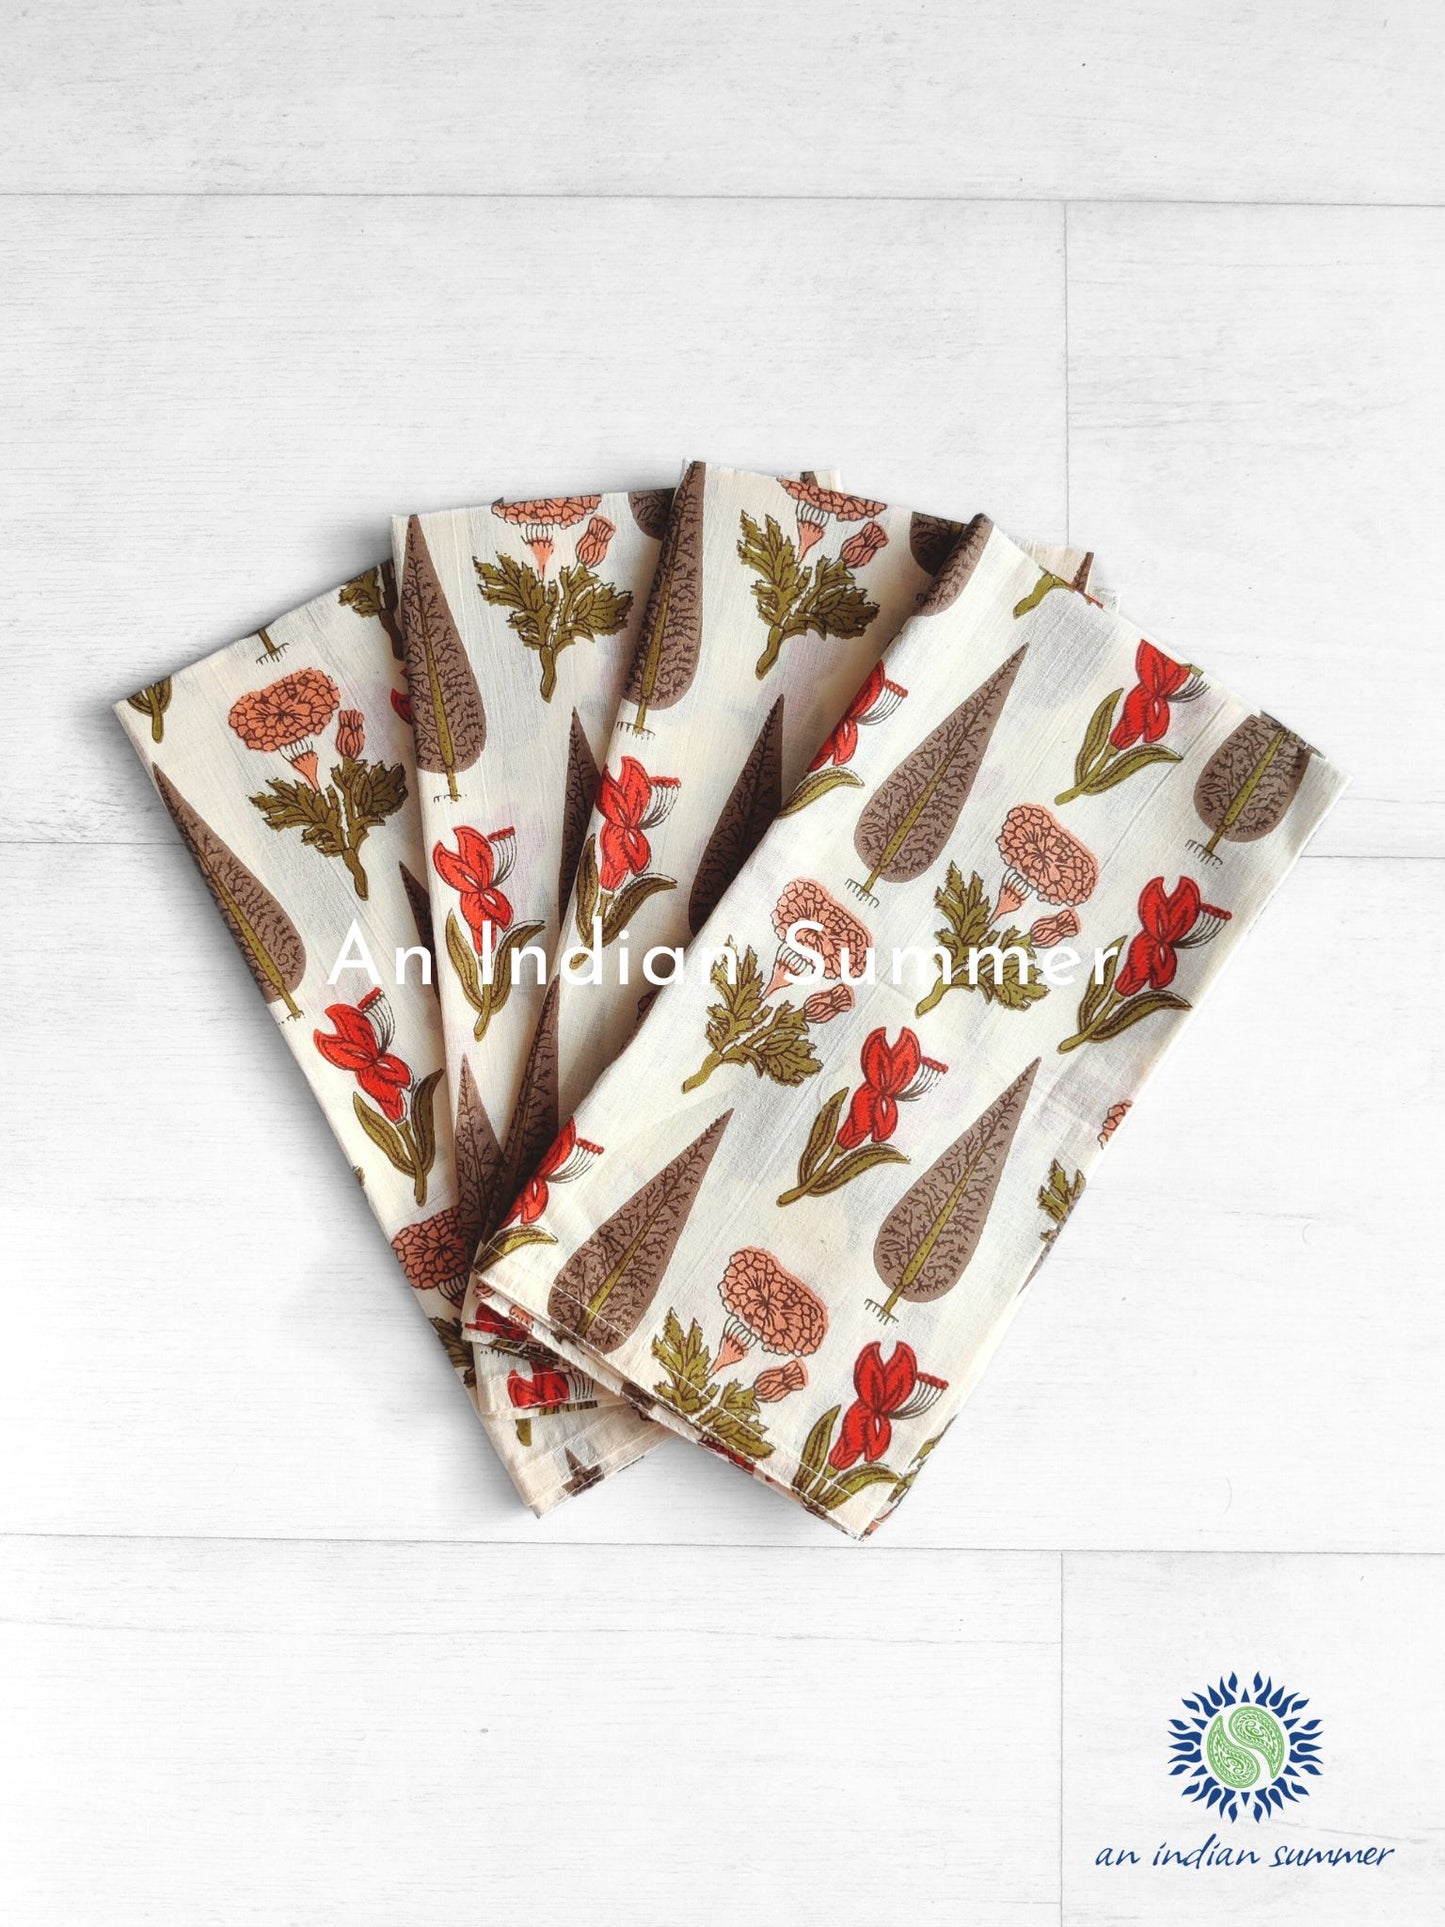 Cotton Napkins - Available in Various Designs